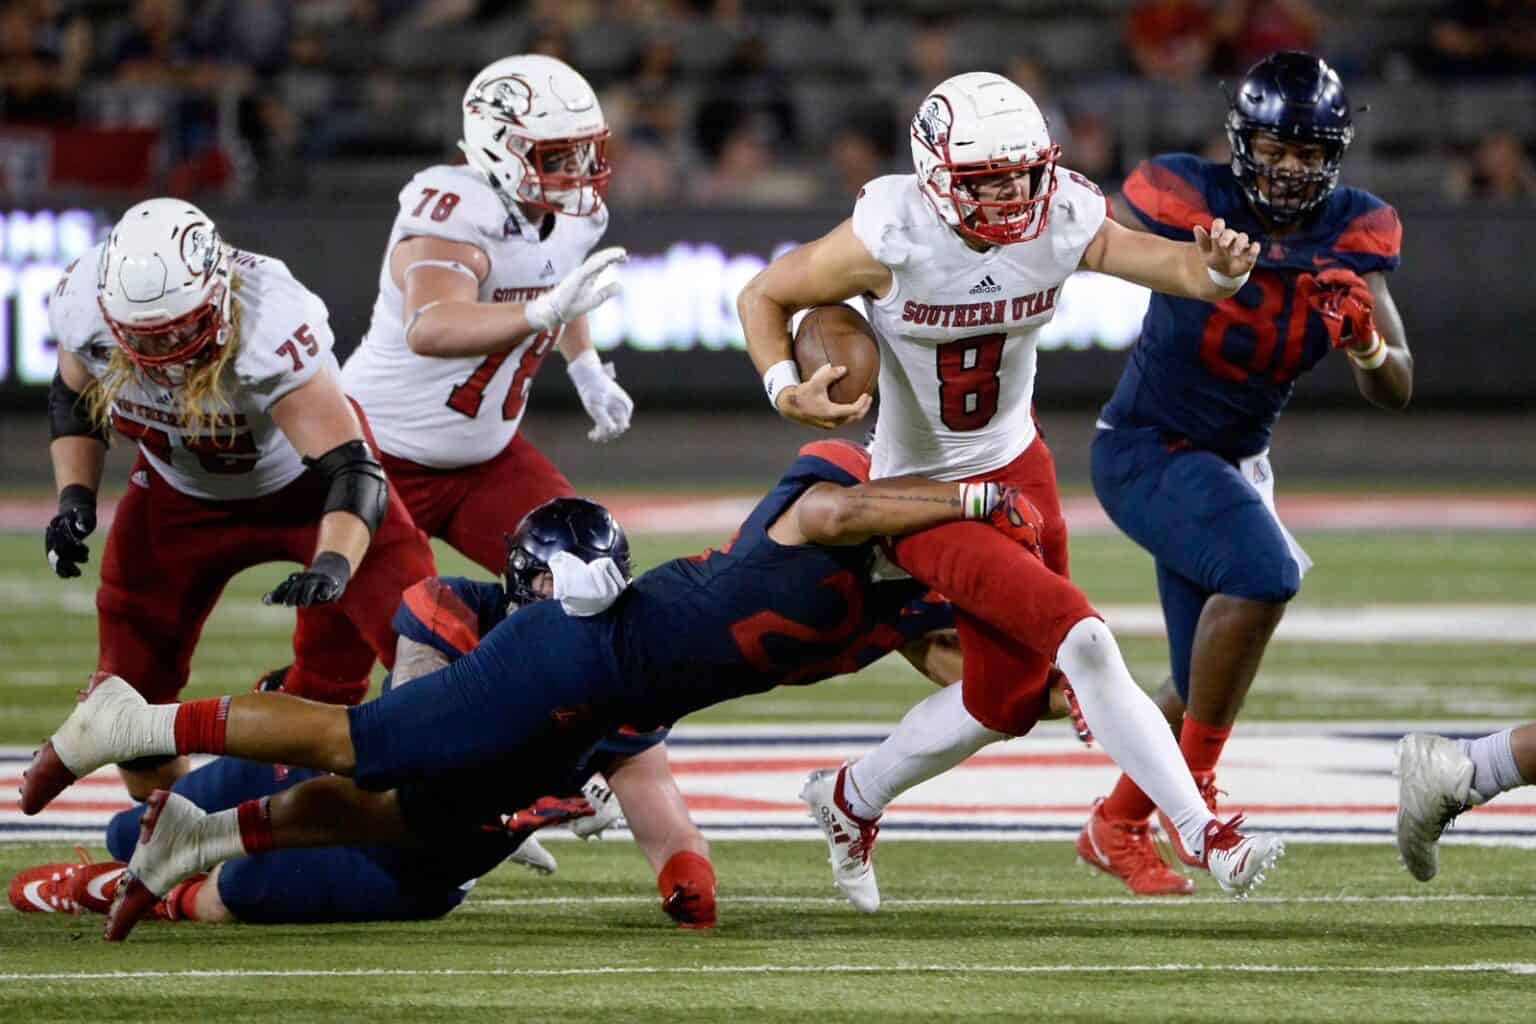 Southern Utah, St. Thomas schedule football series for 2022, 2026